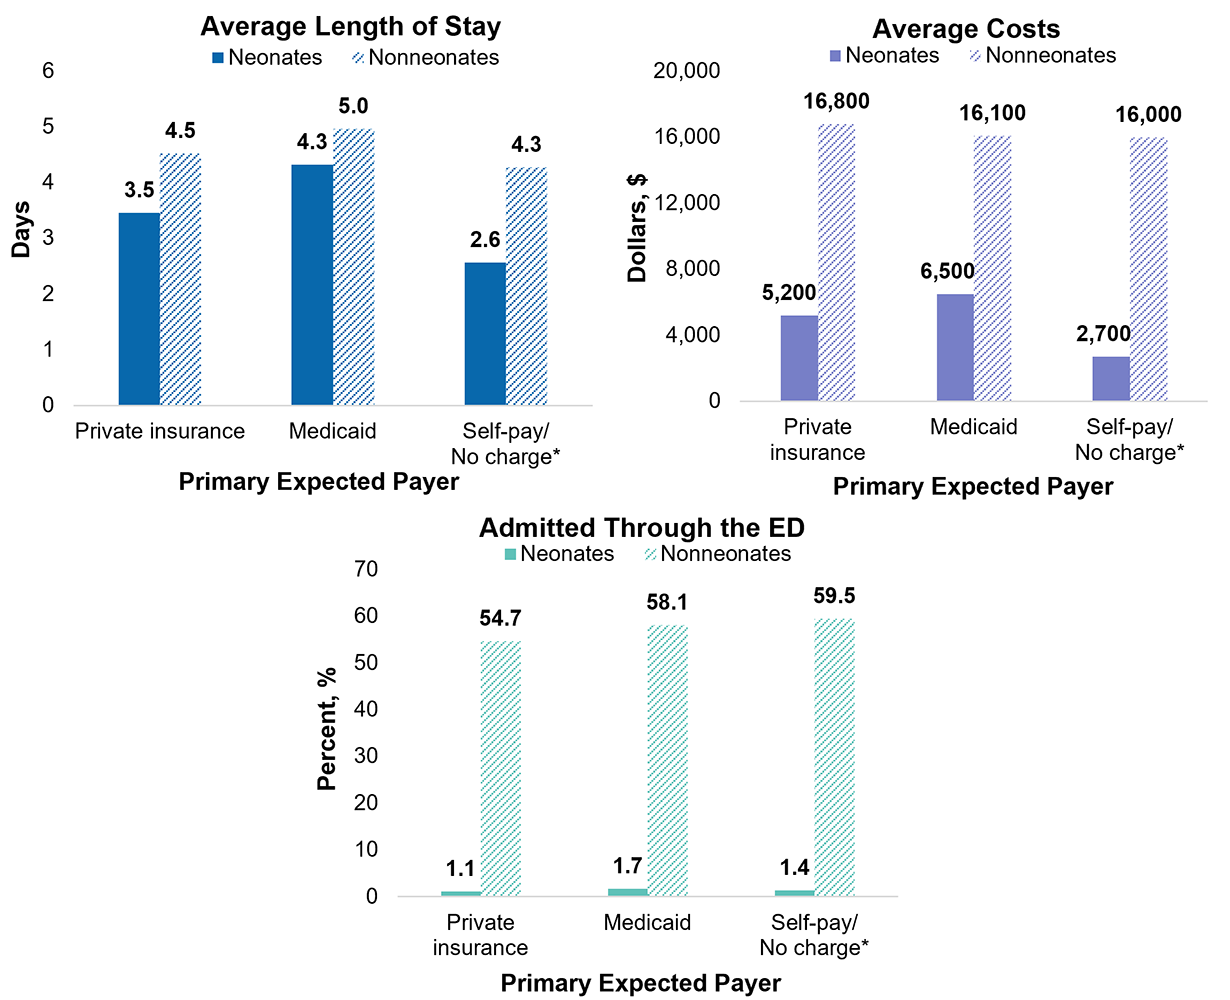 Three bar charts showing the characteristics (average length of stay, average costs, and percentage admitted through the emergency department) of hospital stays among children aged 0-17 years, for neonates versus nonneonates, in 2019. Data are provided in Supplemental Table 1.